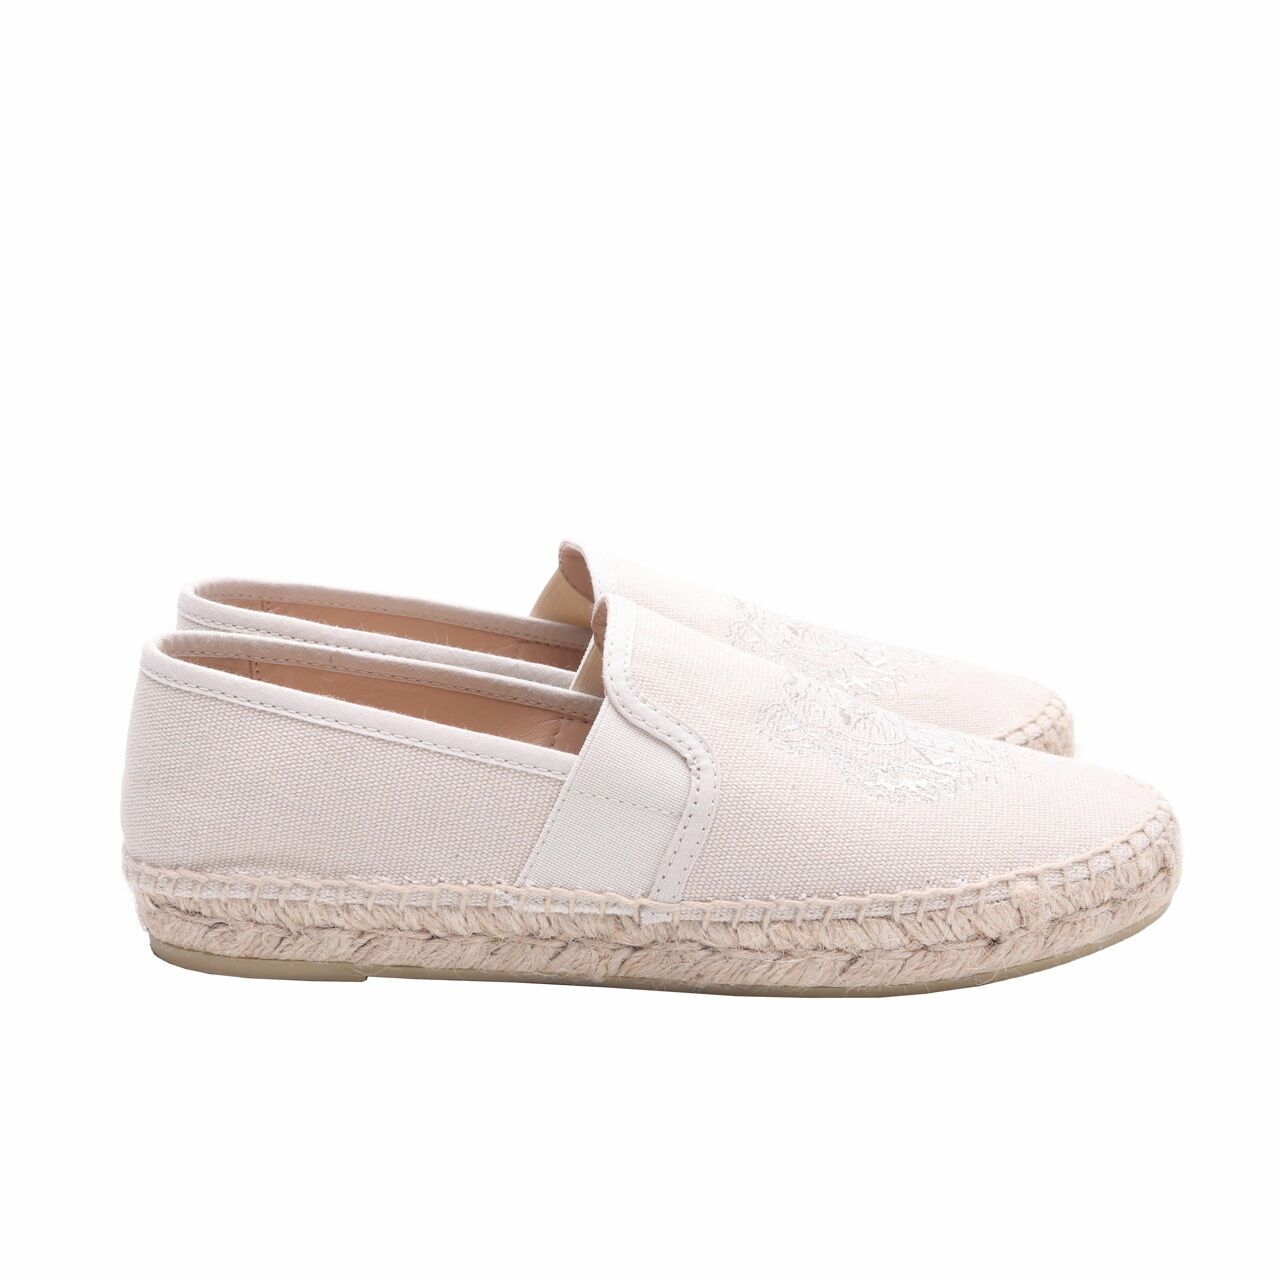 Kenzo Tiger Head Embroidery Canvas Cream Esspadrilles Flat Shoes